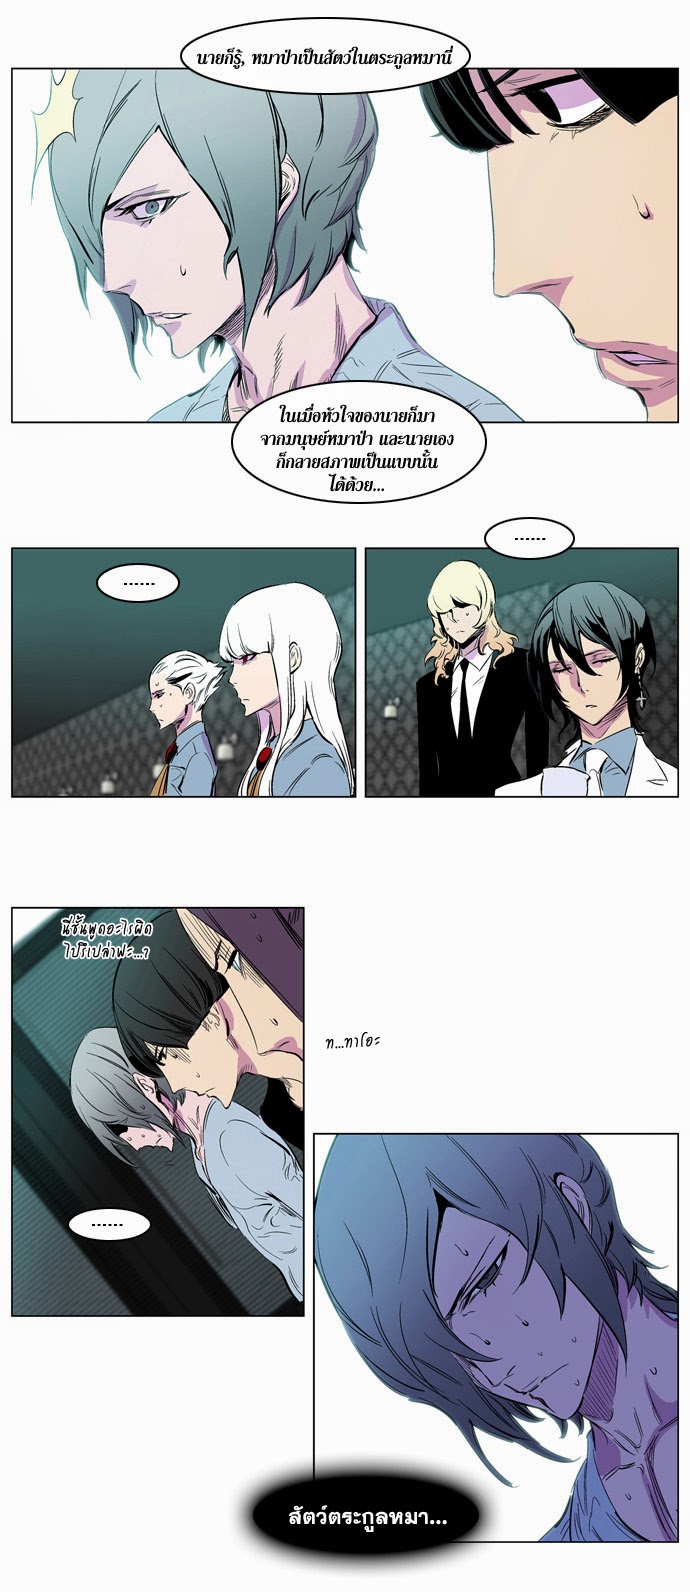 Noblesse 205 018